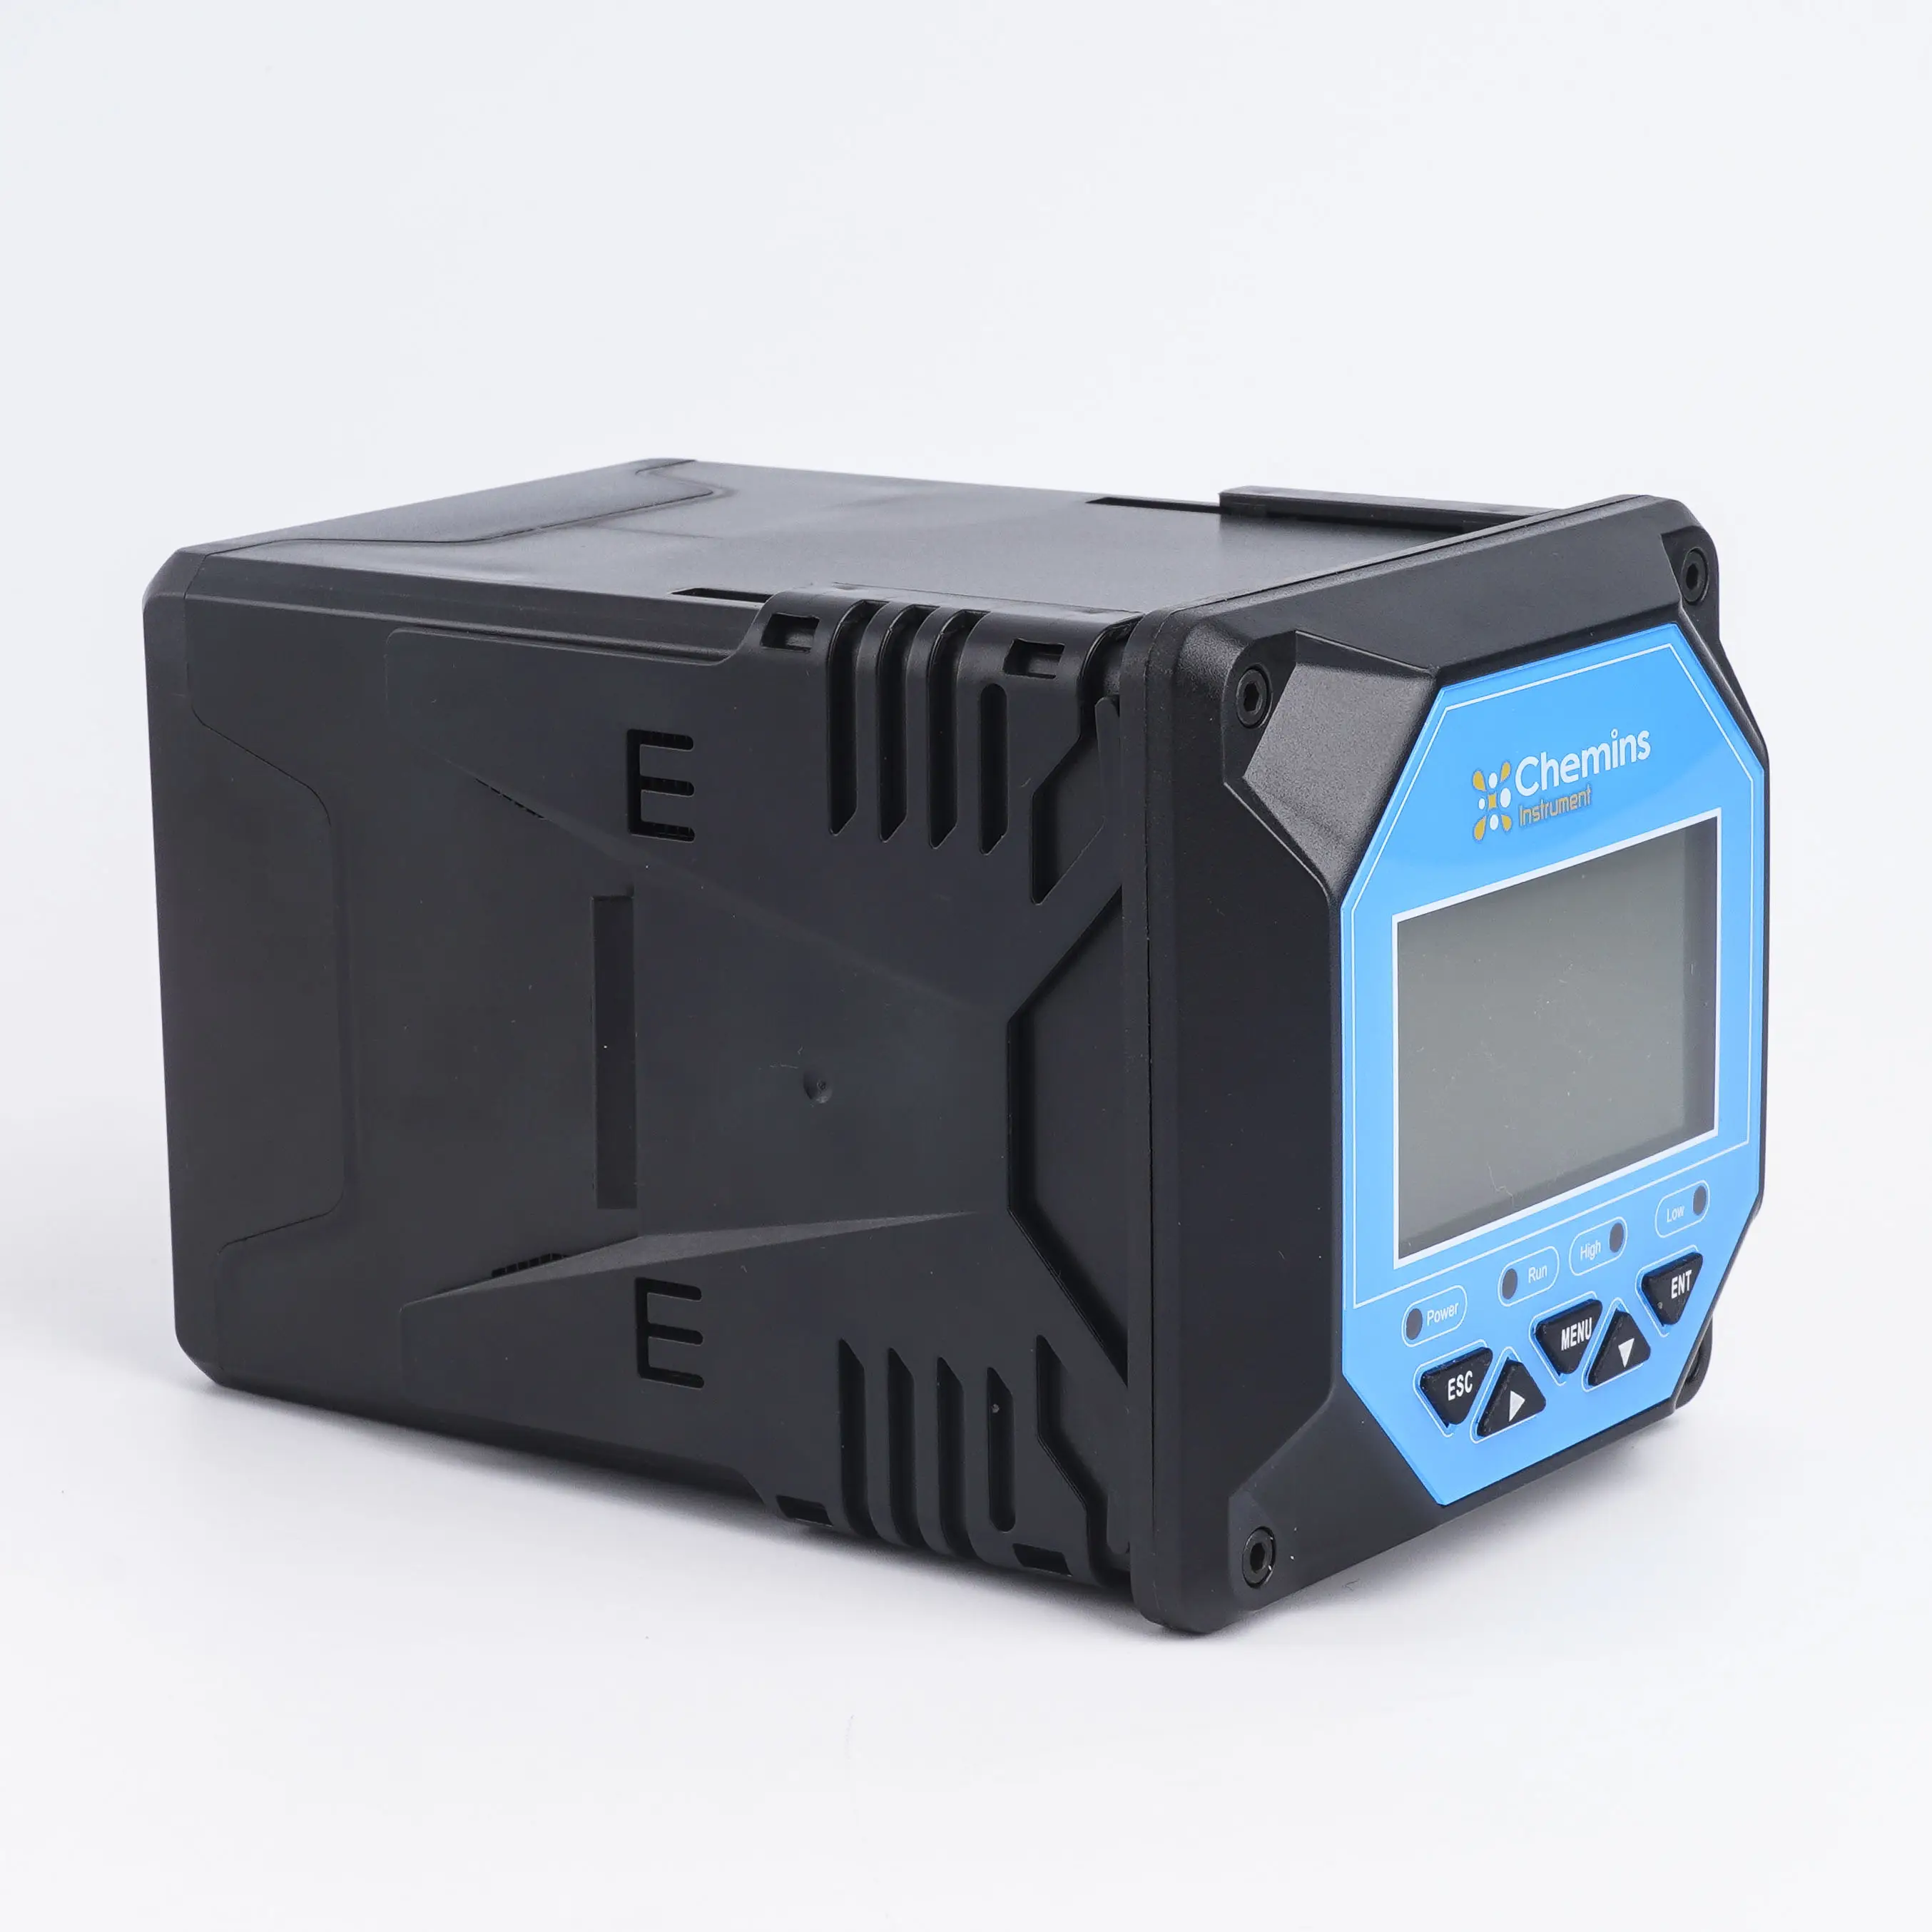 4-20mA output controller dosing industrial low price ph meter/ orp meter with digital display